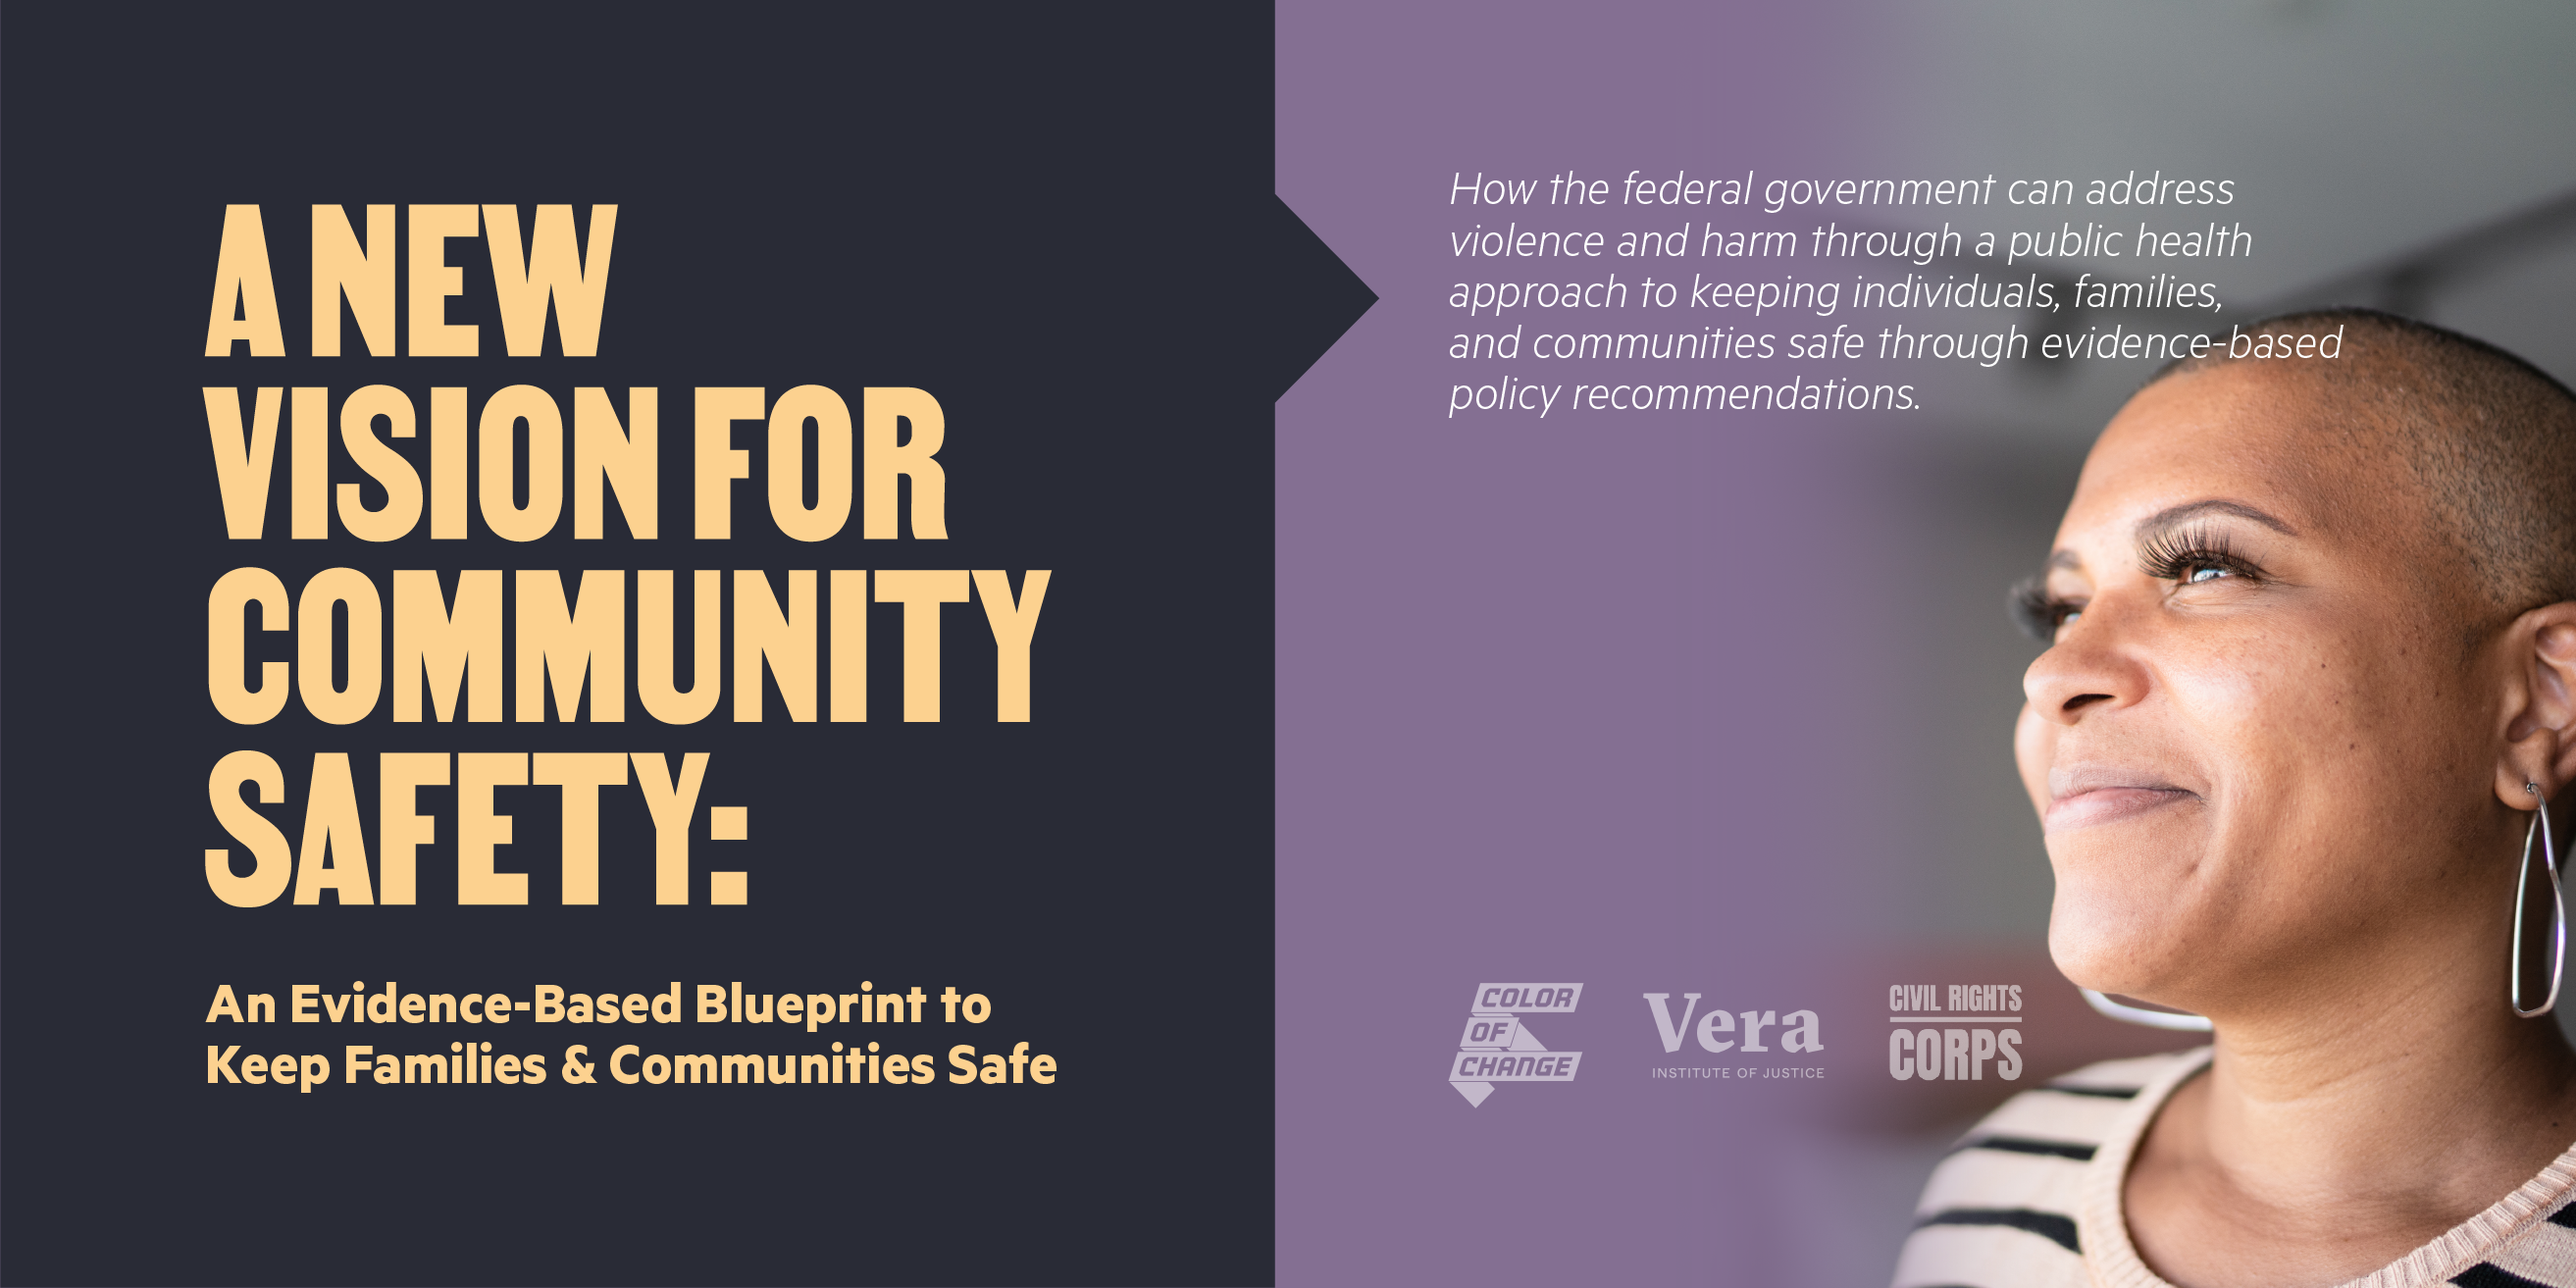 Keep Communities Safe - Call on Congress to suport the Community Safety Agenda.